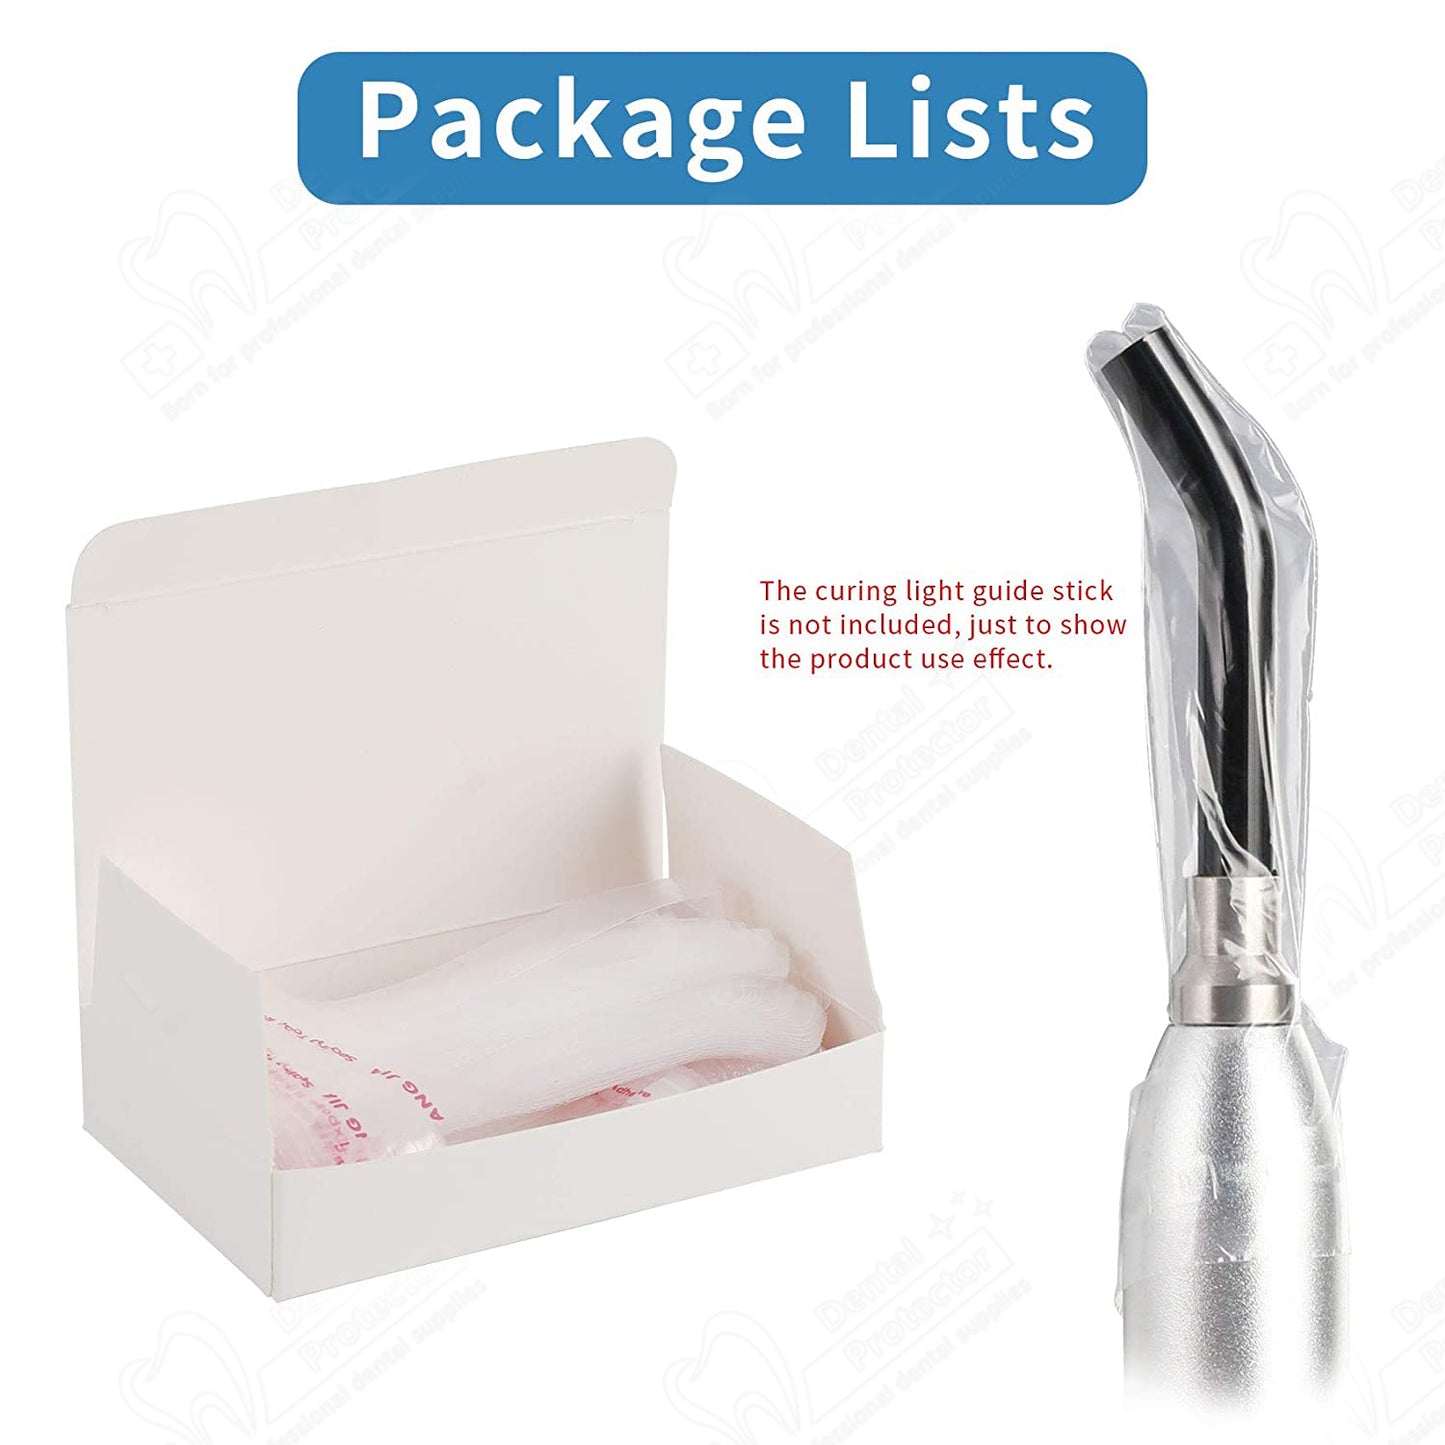 Dental Curing Light Lamp Cover Disposable LED Light Guide Sleeves 200PCS, Implant Protective Cure Covers for Curing Tips - Plastic Optic & Transparent Sheet